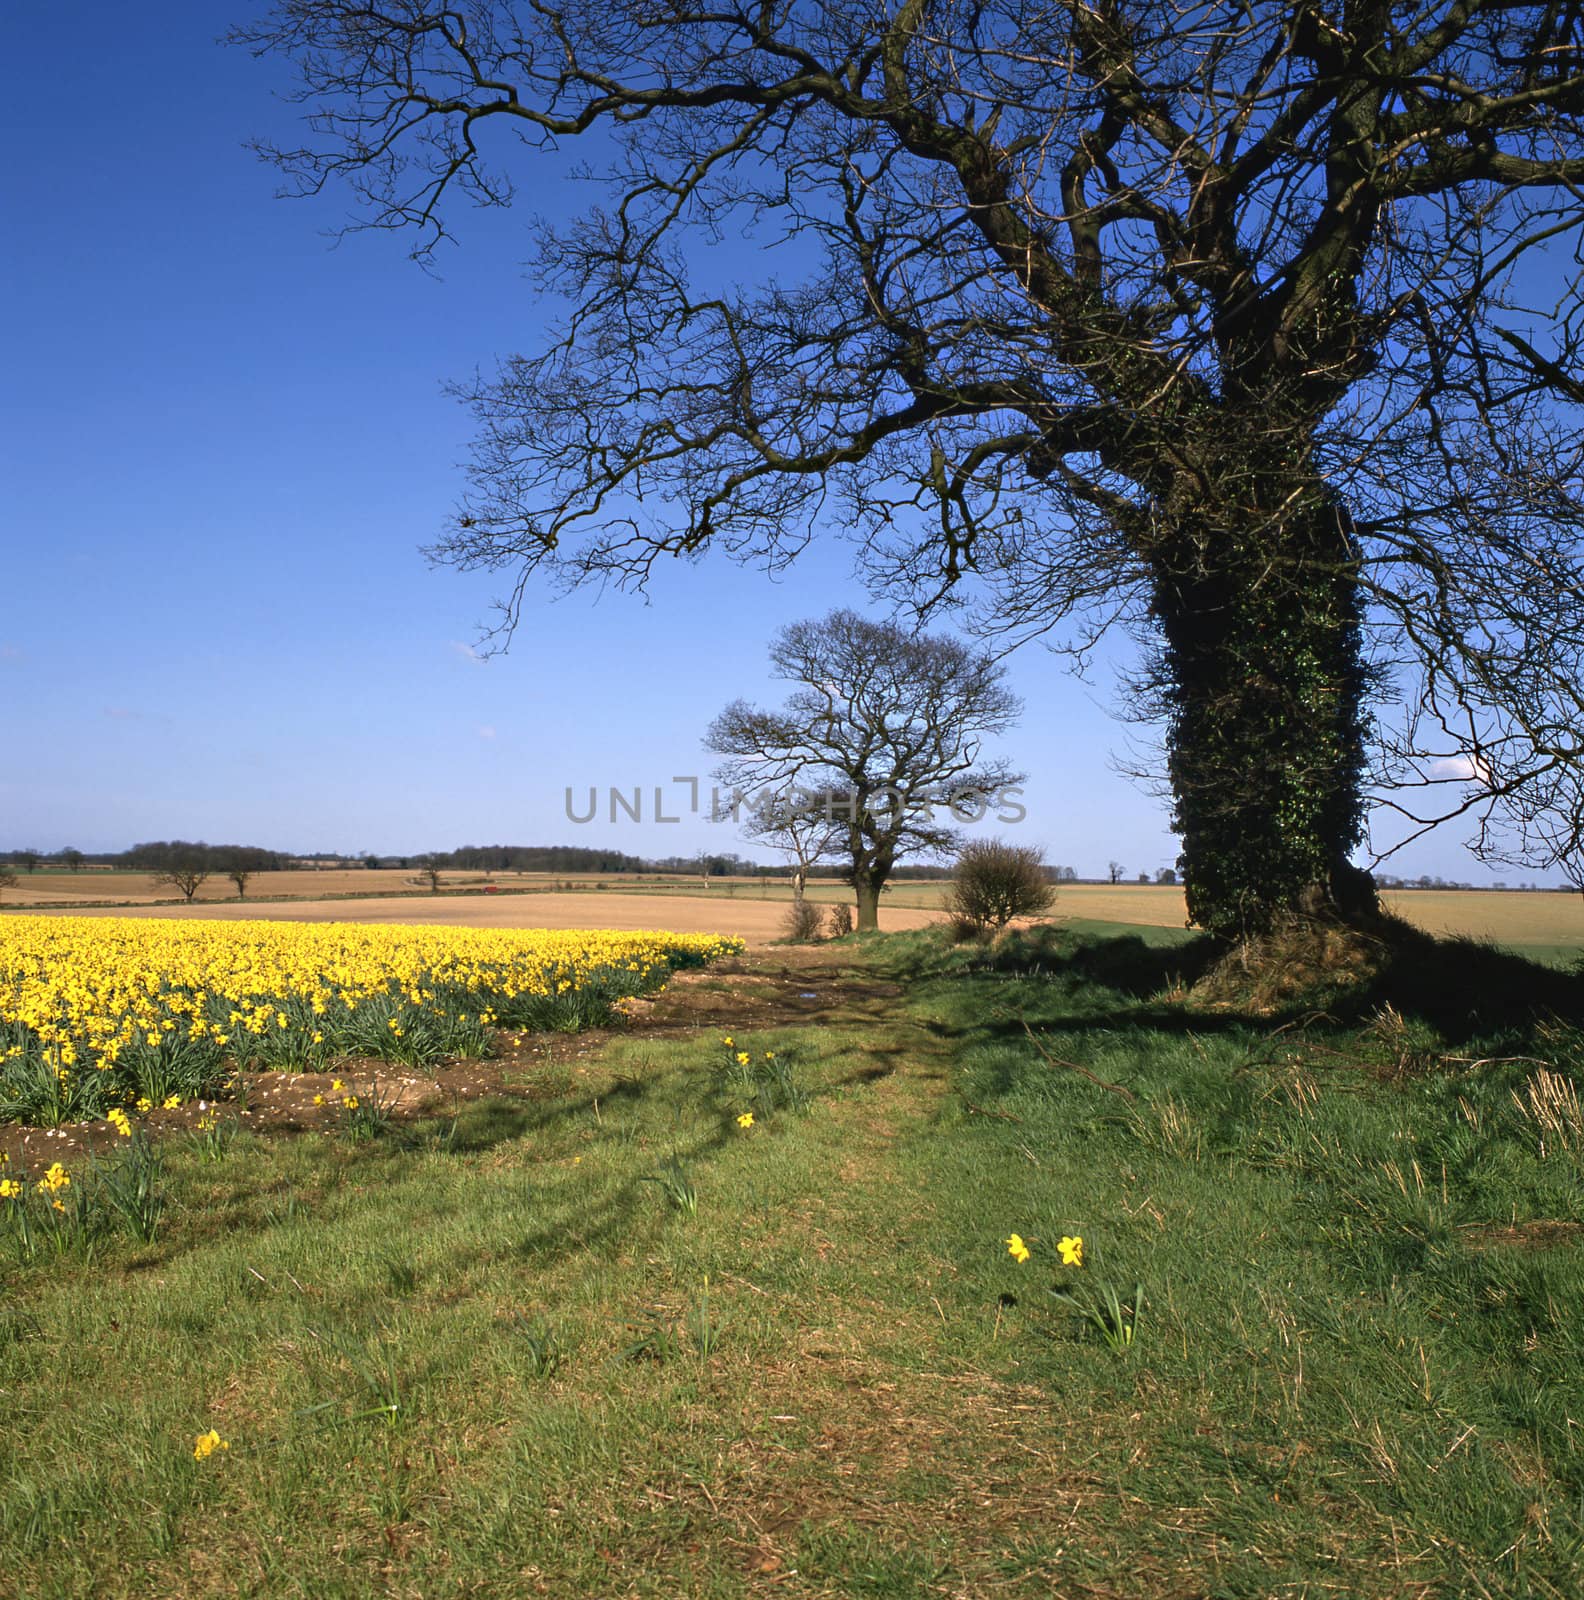 Country lane in springtime with daffodils in fields